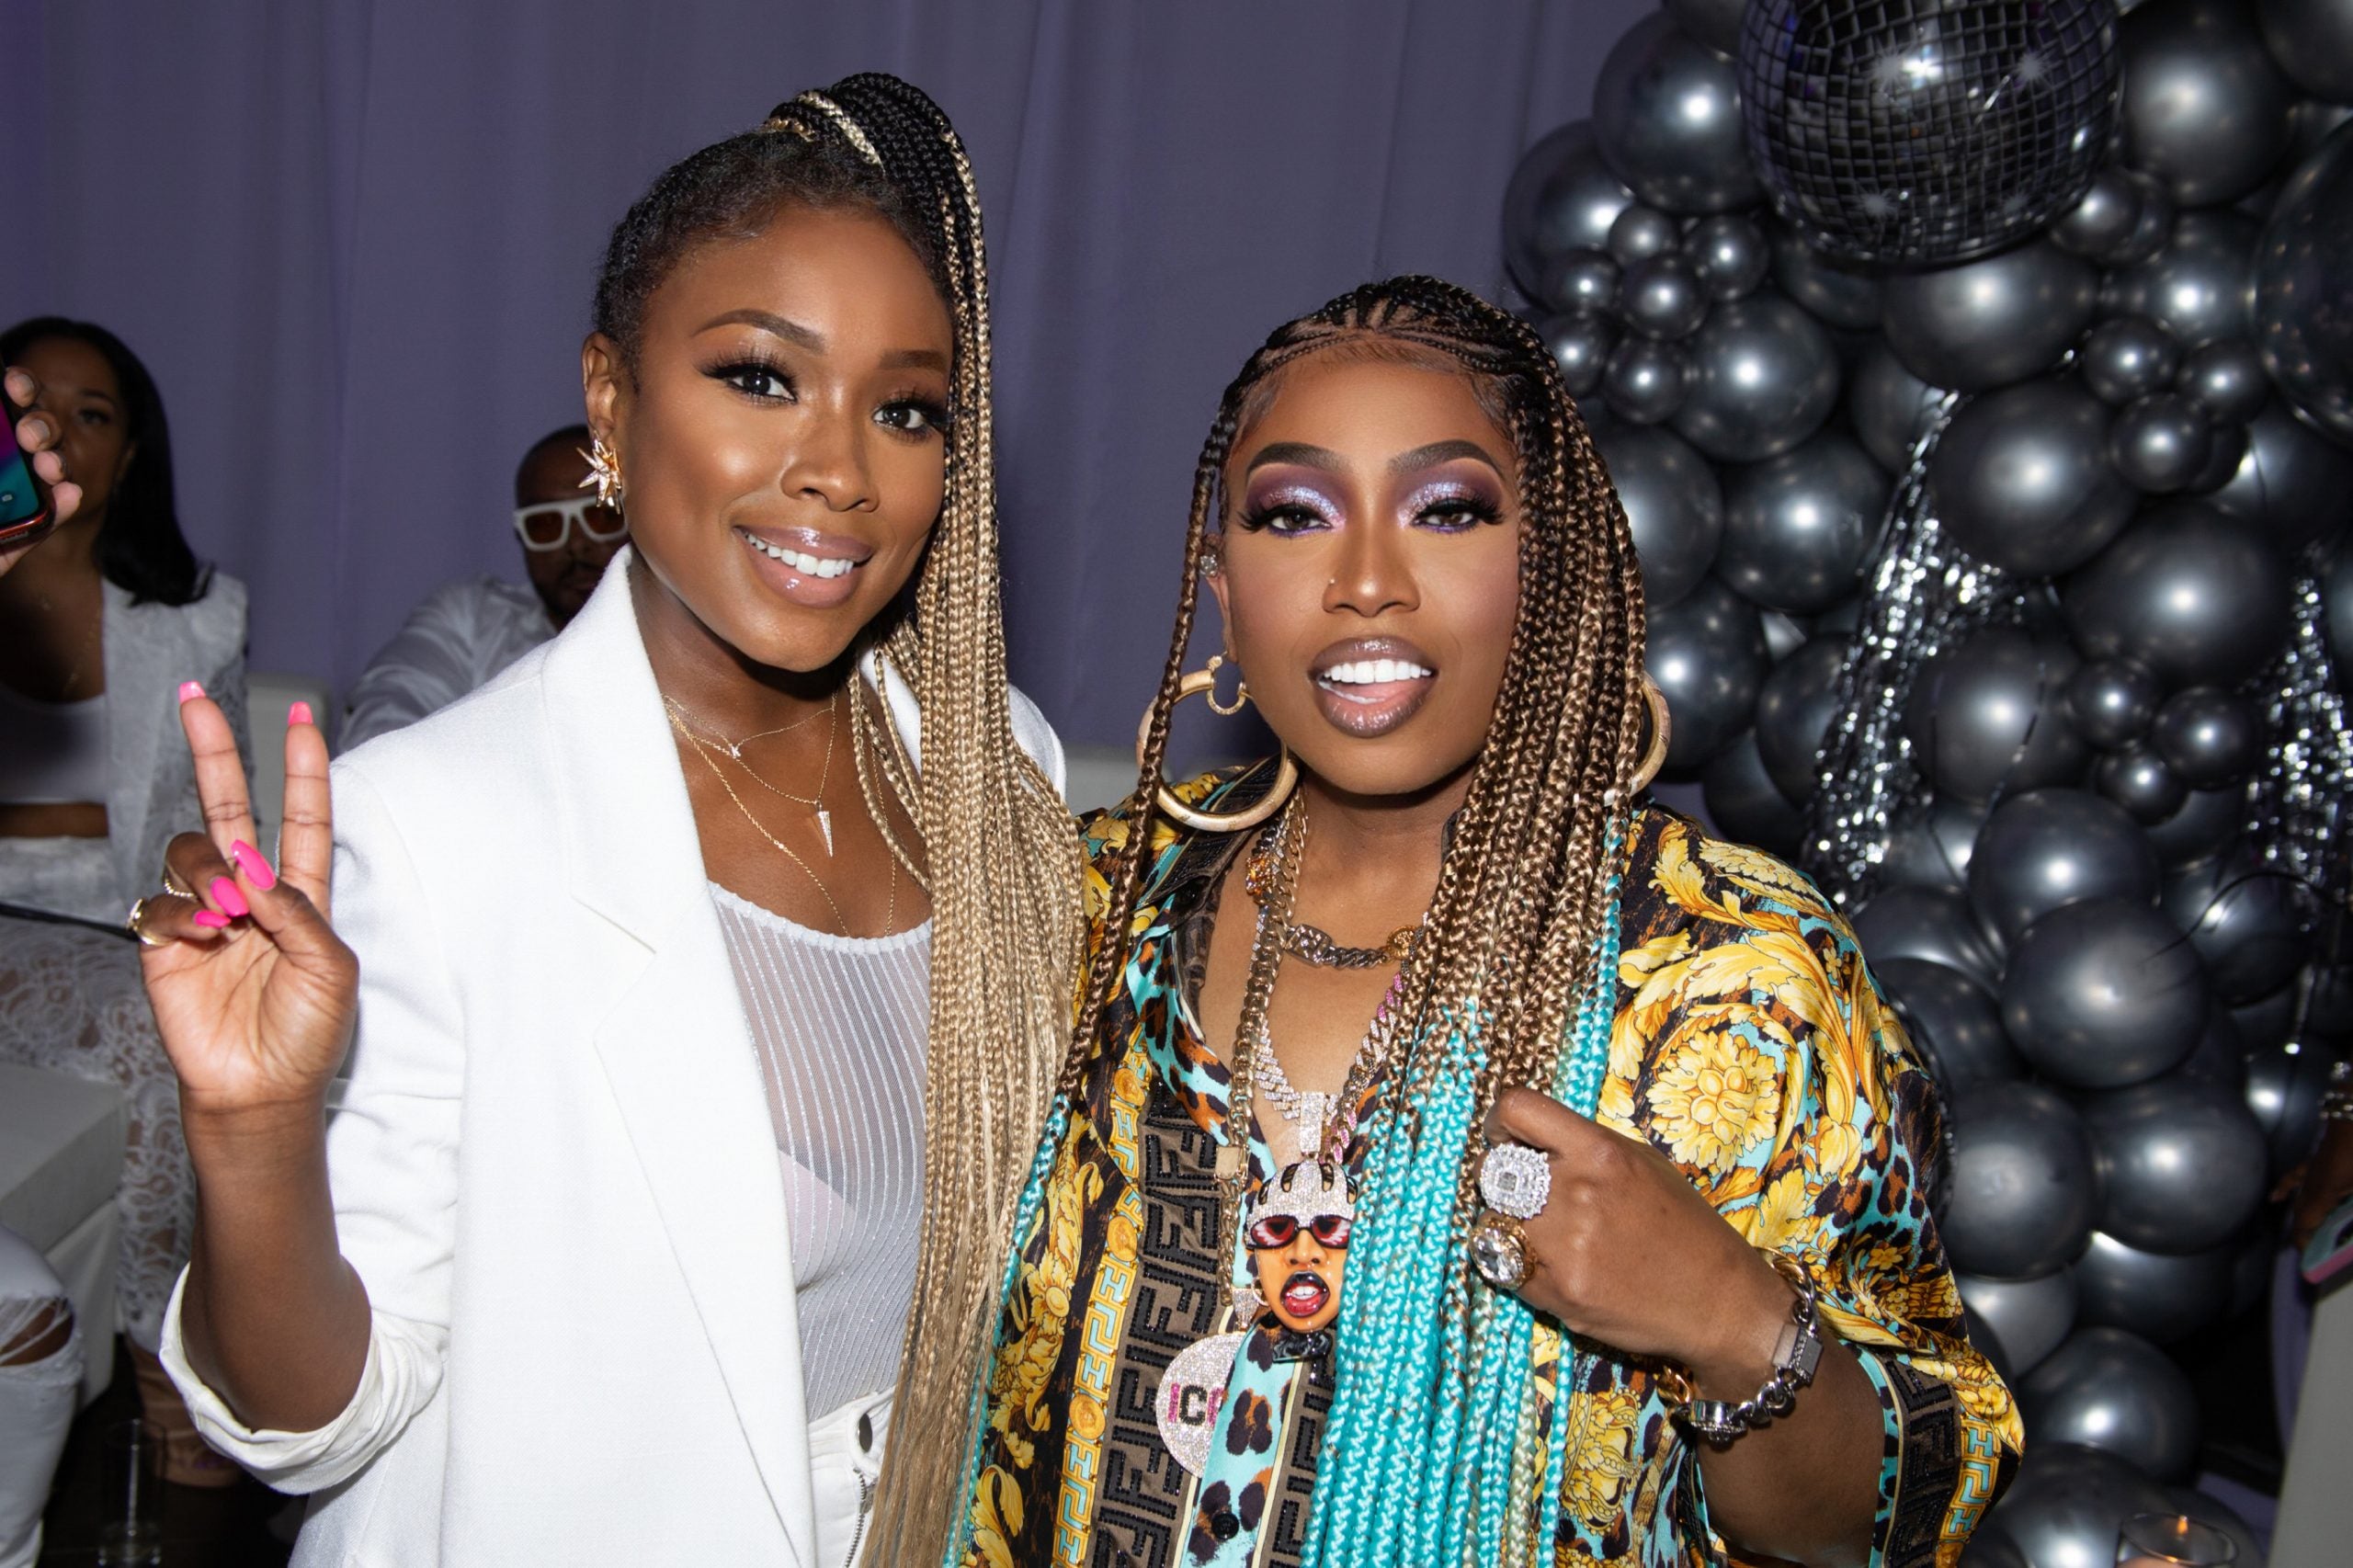 The Iconic Missy Elliott Honored With An Amazing Birthday Bash To Celebrate 25th Anniversary Of ‘Supa Dupa Fly’